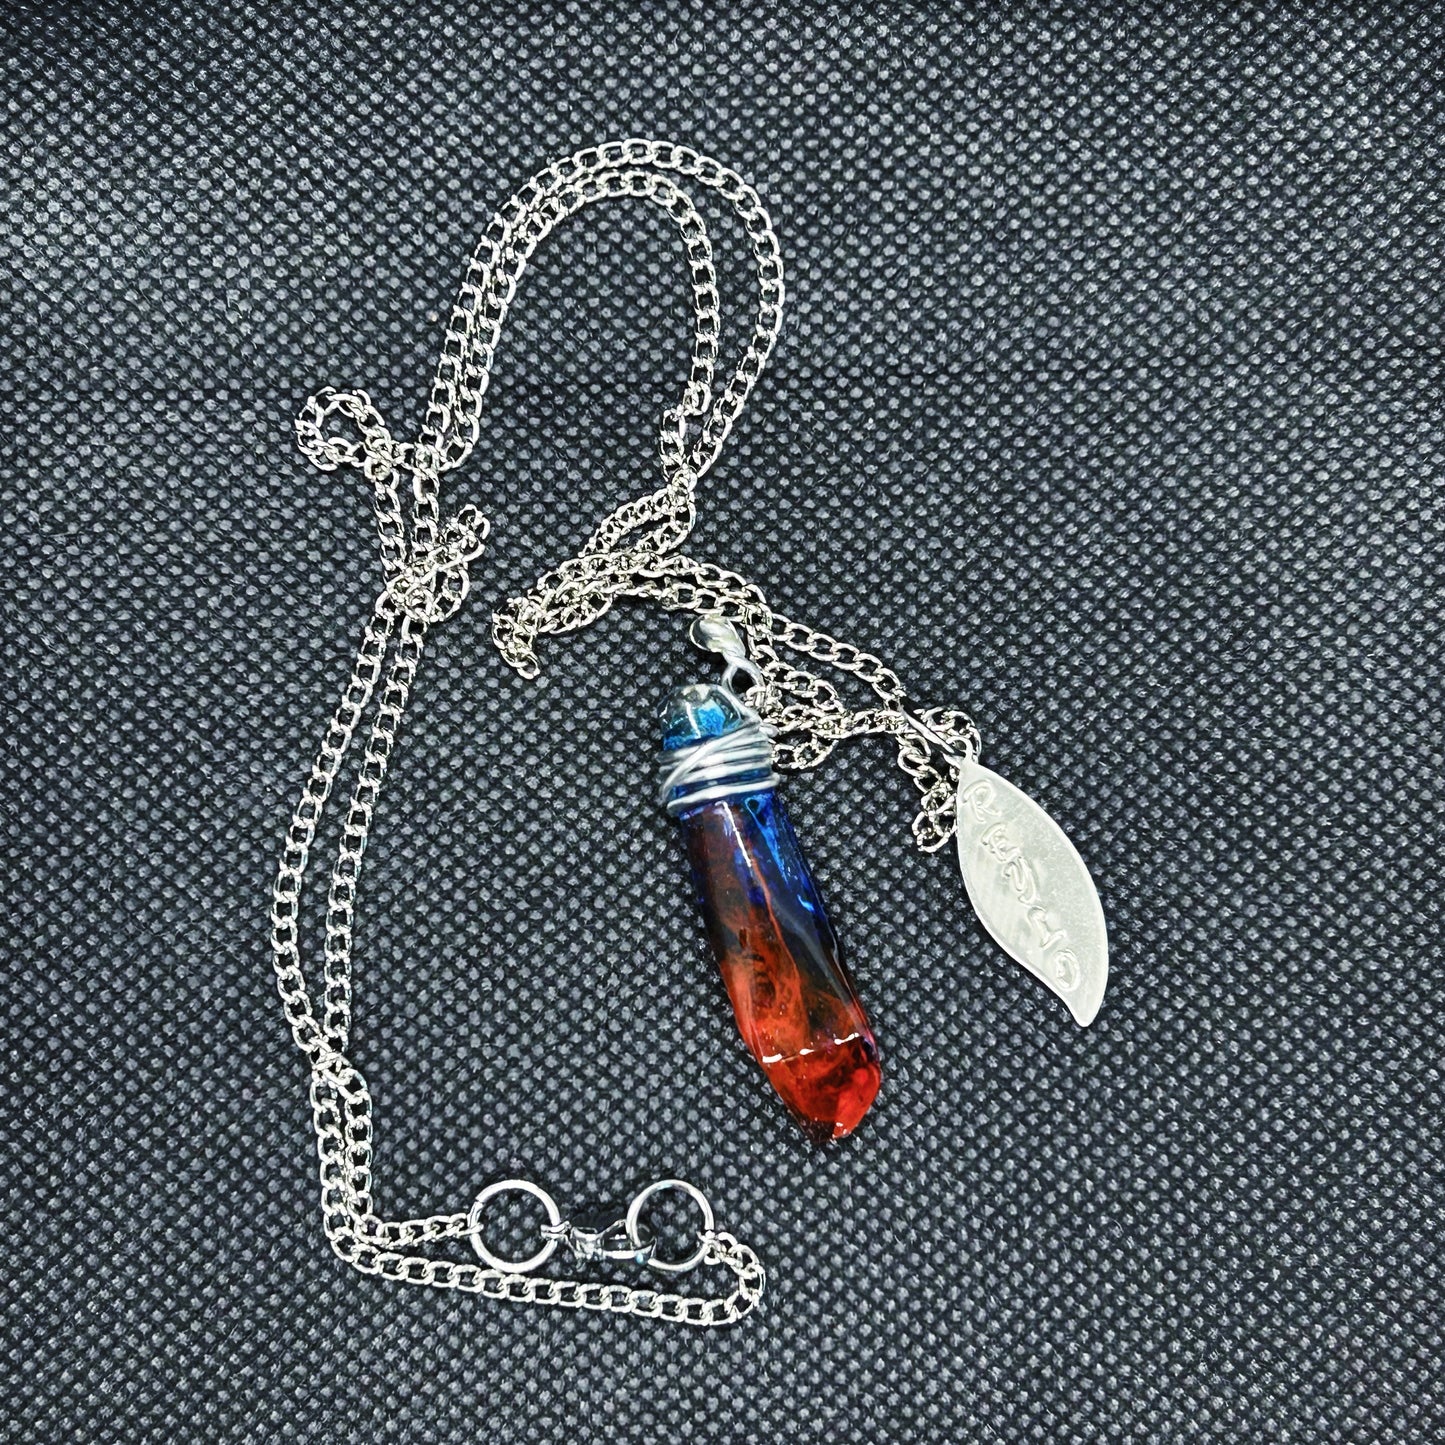 Kyber Crystal Necklace